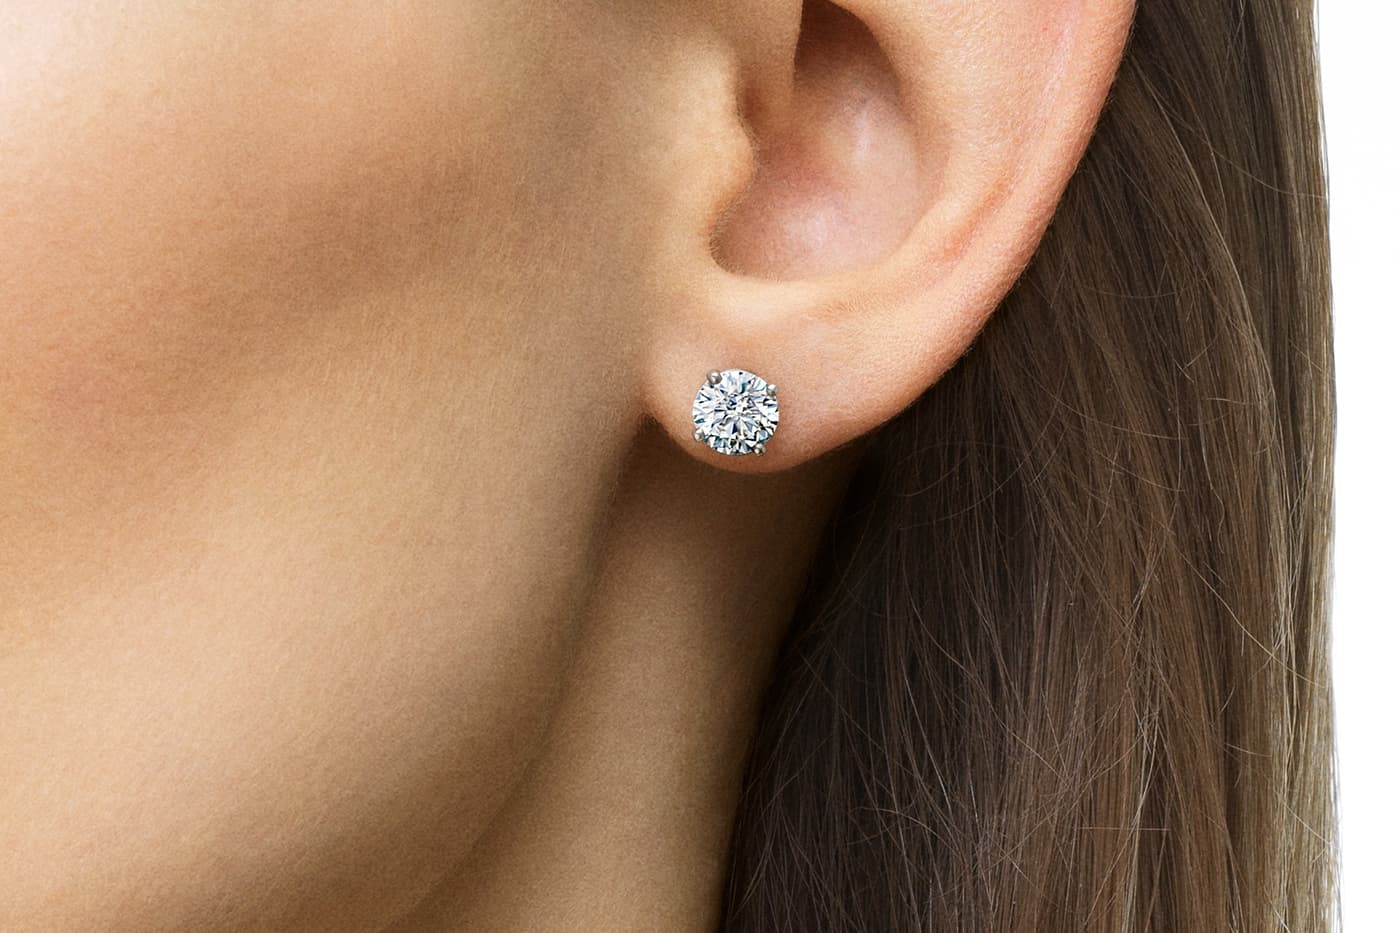 De Beers 'Classic' stud earrings with diamonds in white gold